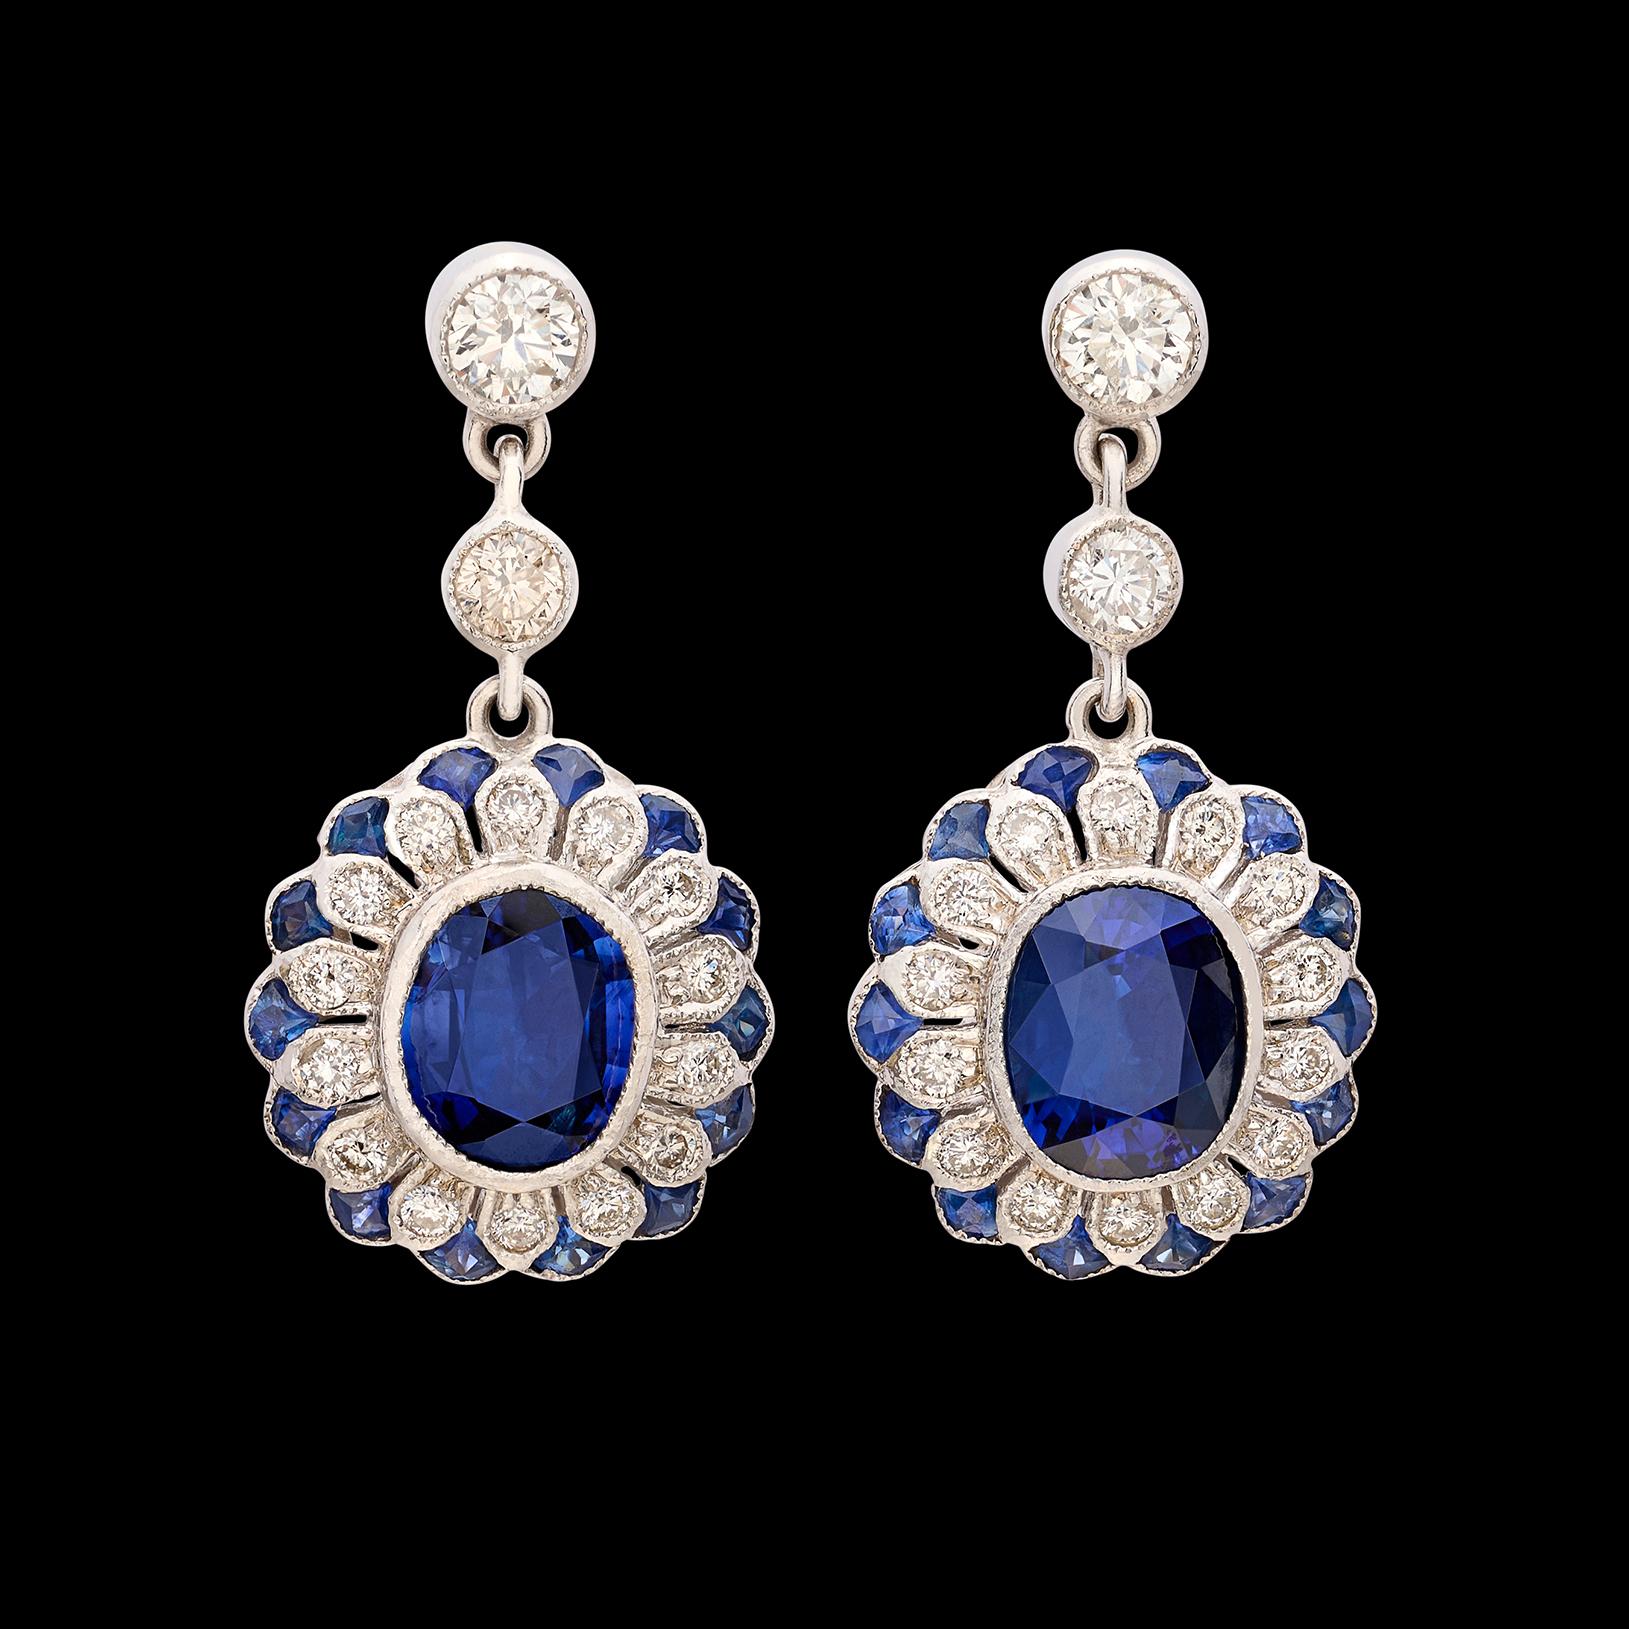 If you're looking for the perfect pair or earrings, your search may have just ended! This exceptionally beautiful 18 karat white gold drop earrings feature 2 gorgeous center sapphires weighing a total of 3.12 carats, suspended in a lovely design